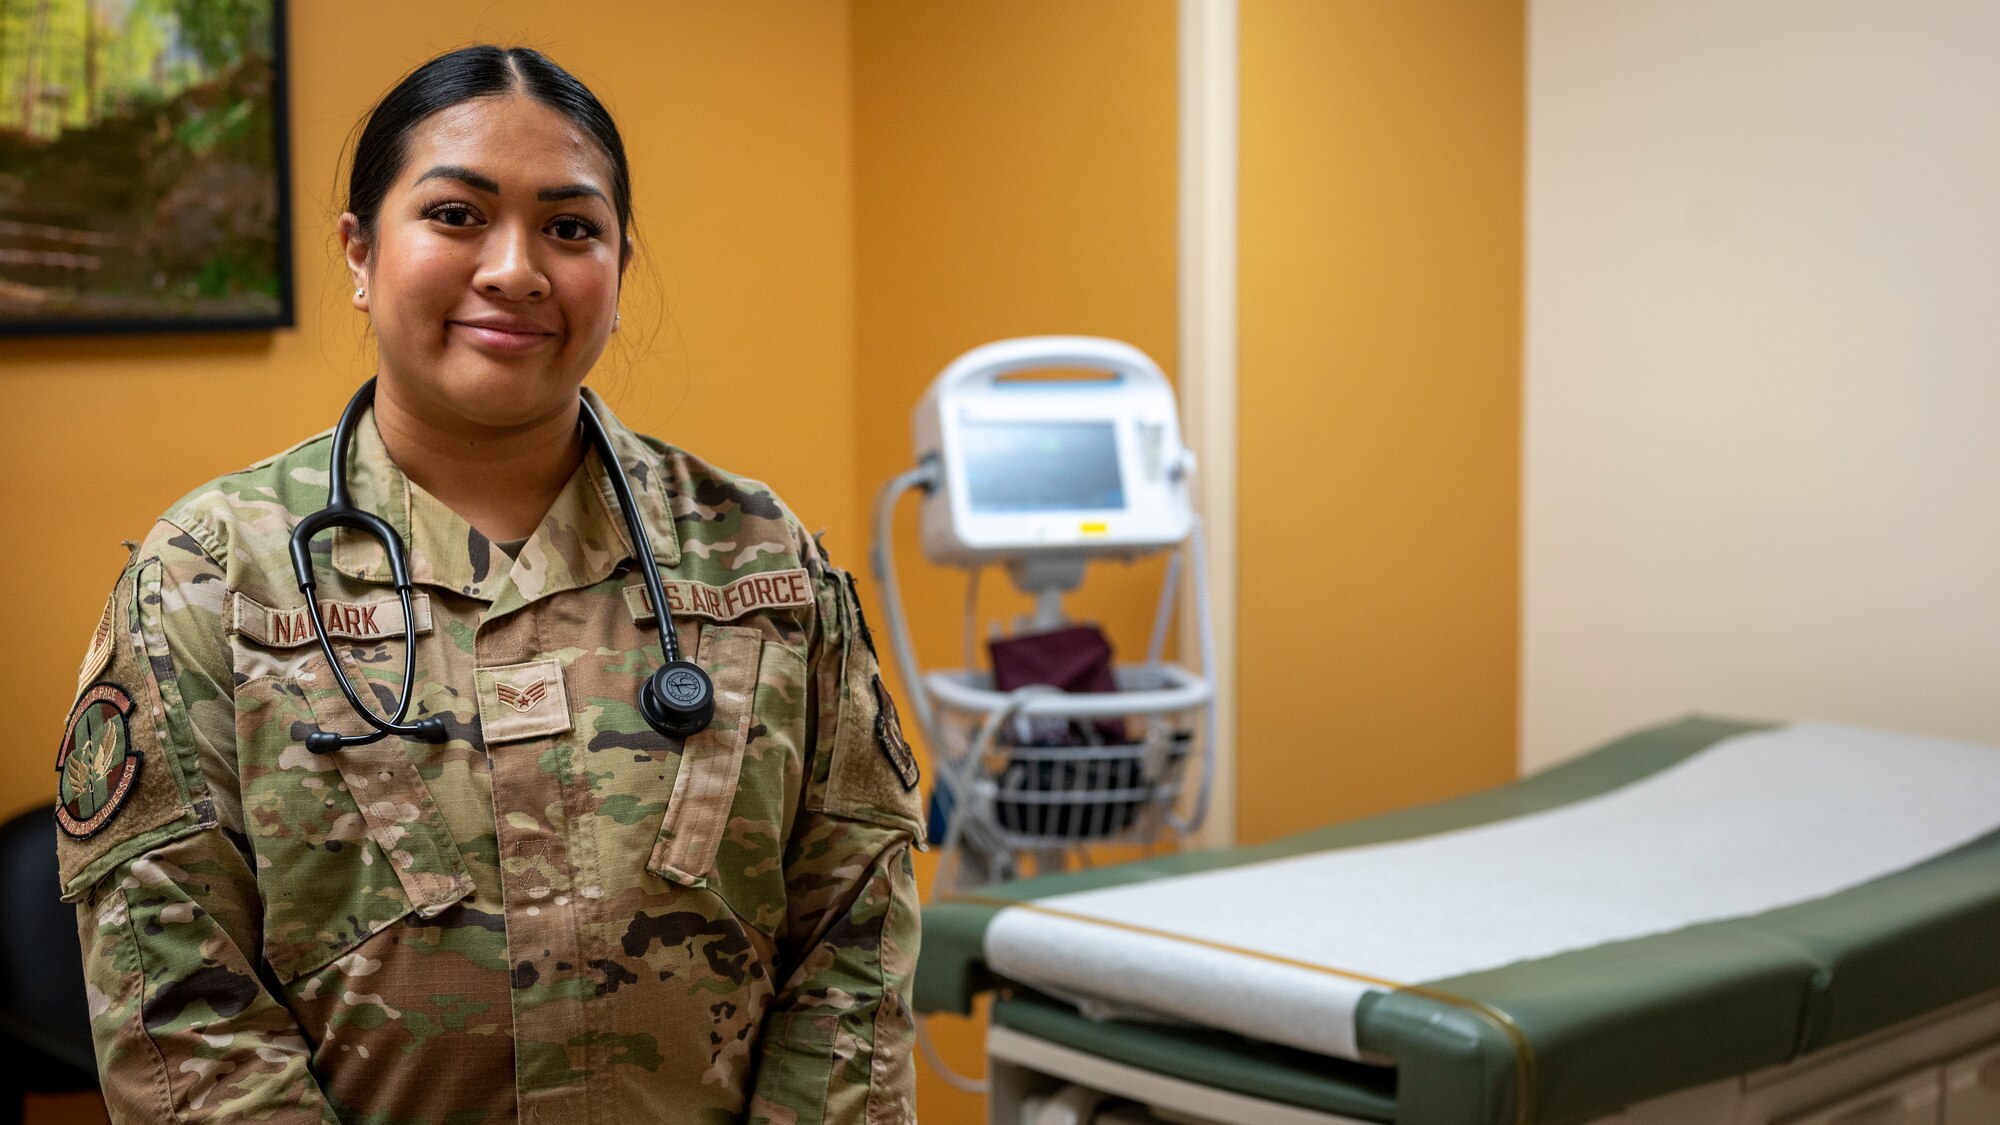 U.S. Air Force Senior Airman Kylah Nanark, 51st Operational Medical Readiness Squadron warrior medicine clinic technician, poses for a photo at Osan Air Base, Republic of Korea, April 10, 2024. Nanark earned Mustang of the Week when she back-filled a section chief position, leading 11 members, and performing medical clearances and record reviews, ensuring Osan Airmen remain fit to fight. (U.S. Air Force photo by Senior Airman Sabrina Fuller-Judd)